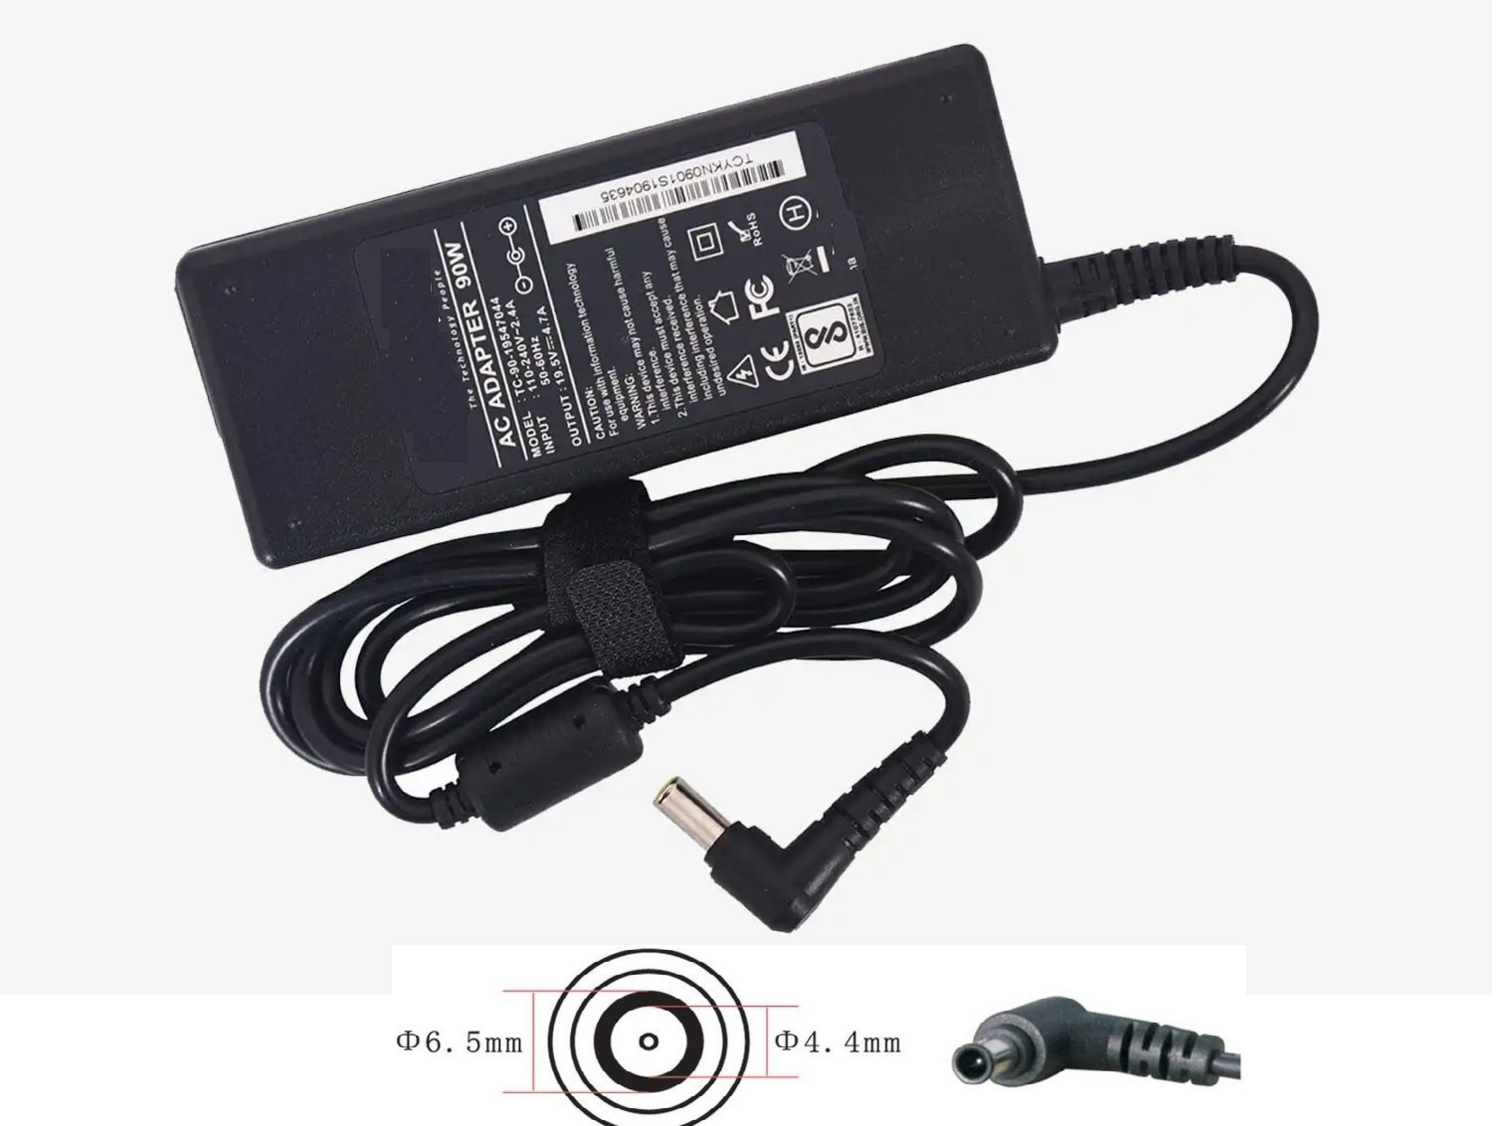 sony vaio SZ series N series NR series Compatible Laptop charger / AC power Adaptor